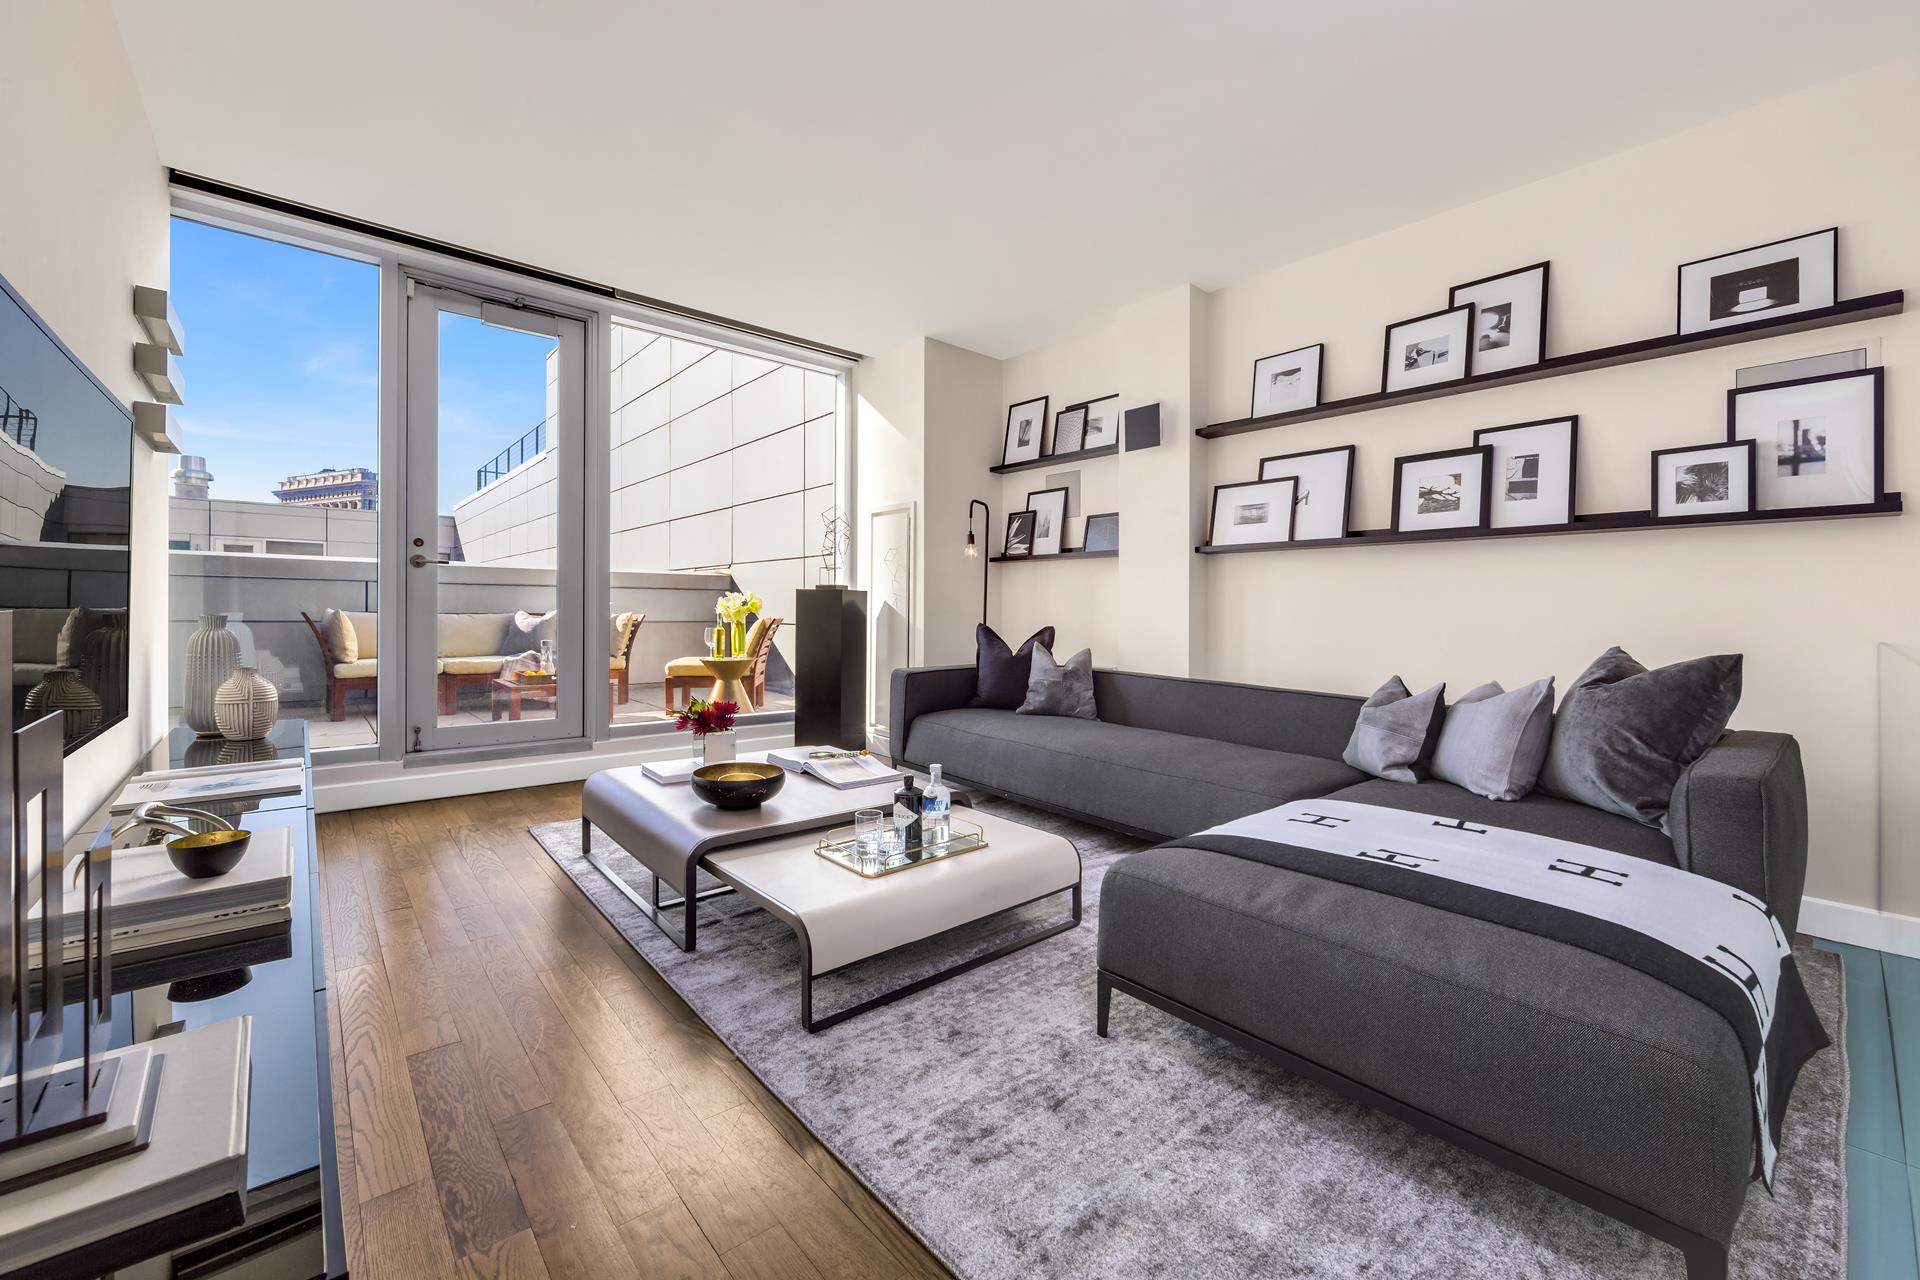 225 5th Avenue Phy, Nomad, Downtown, NYC - 3 Bedrooms  
3 Bathrooms  
6 Rooms - 